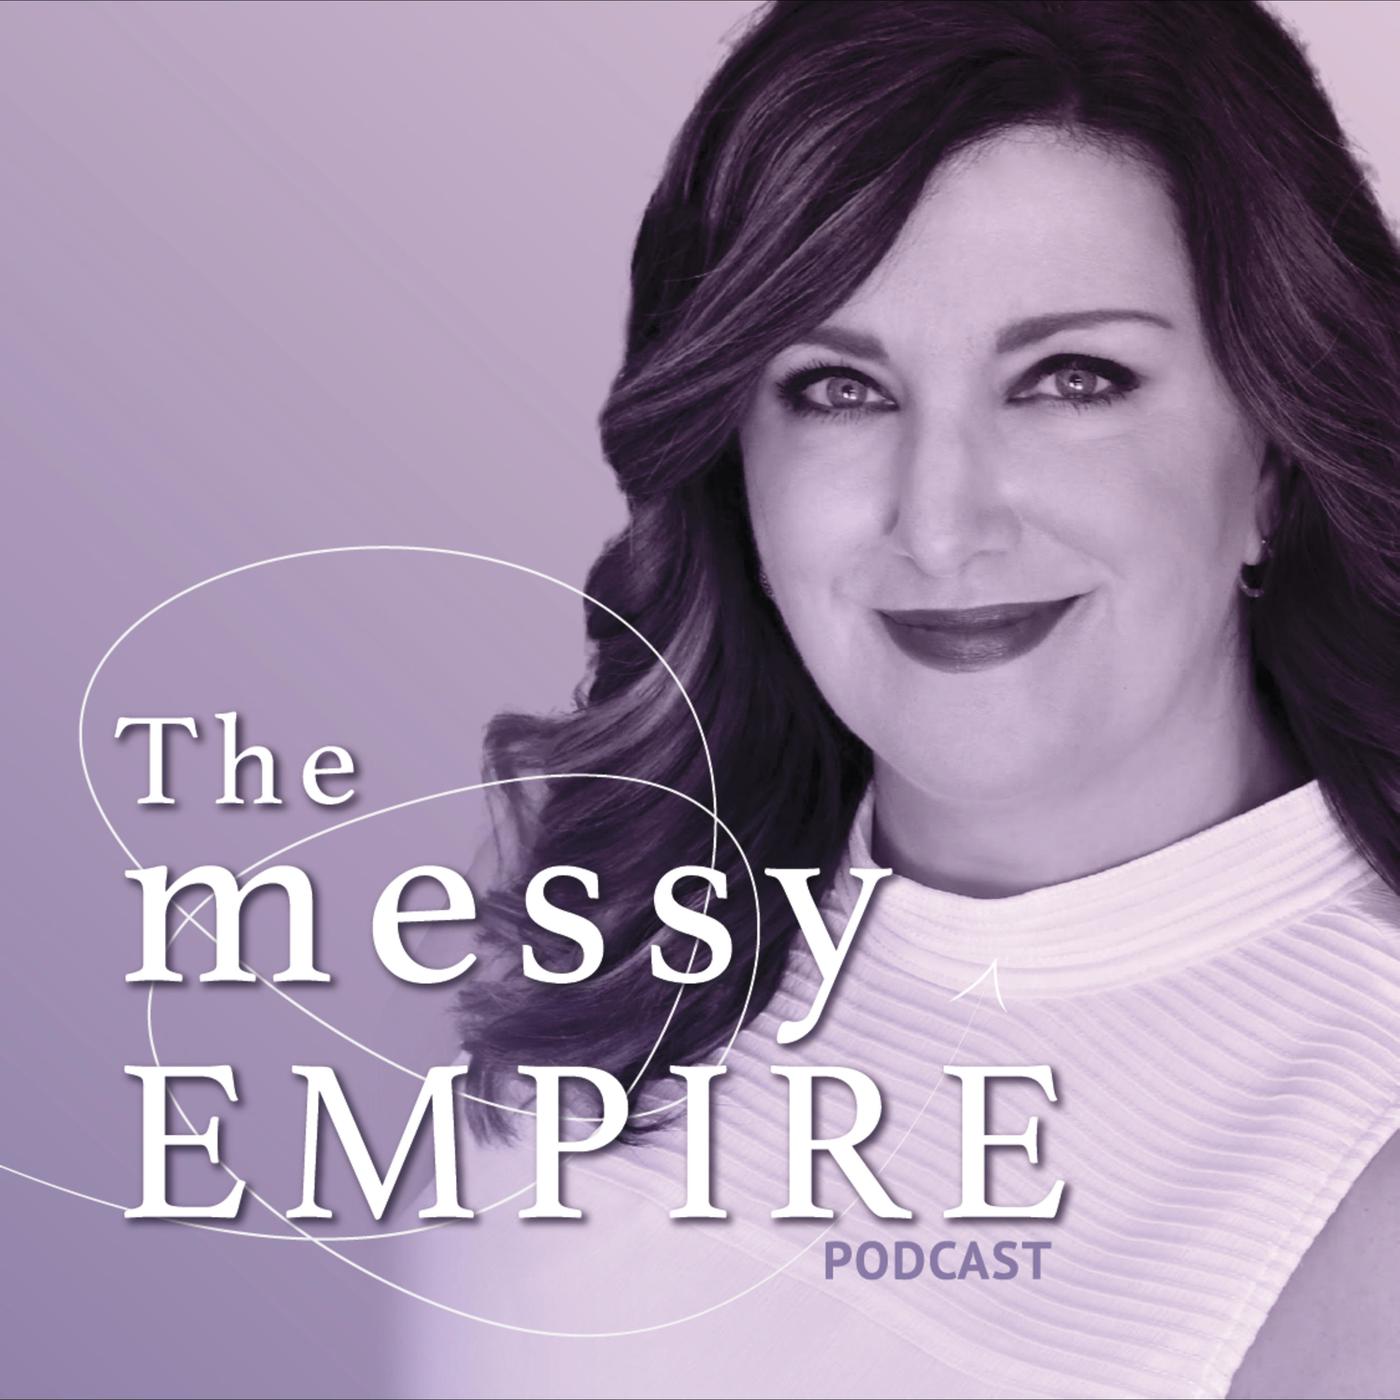 The Messy Empire - Caryn Prall Podcast